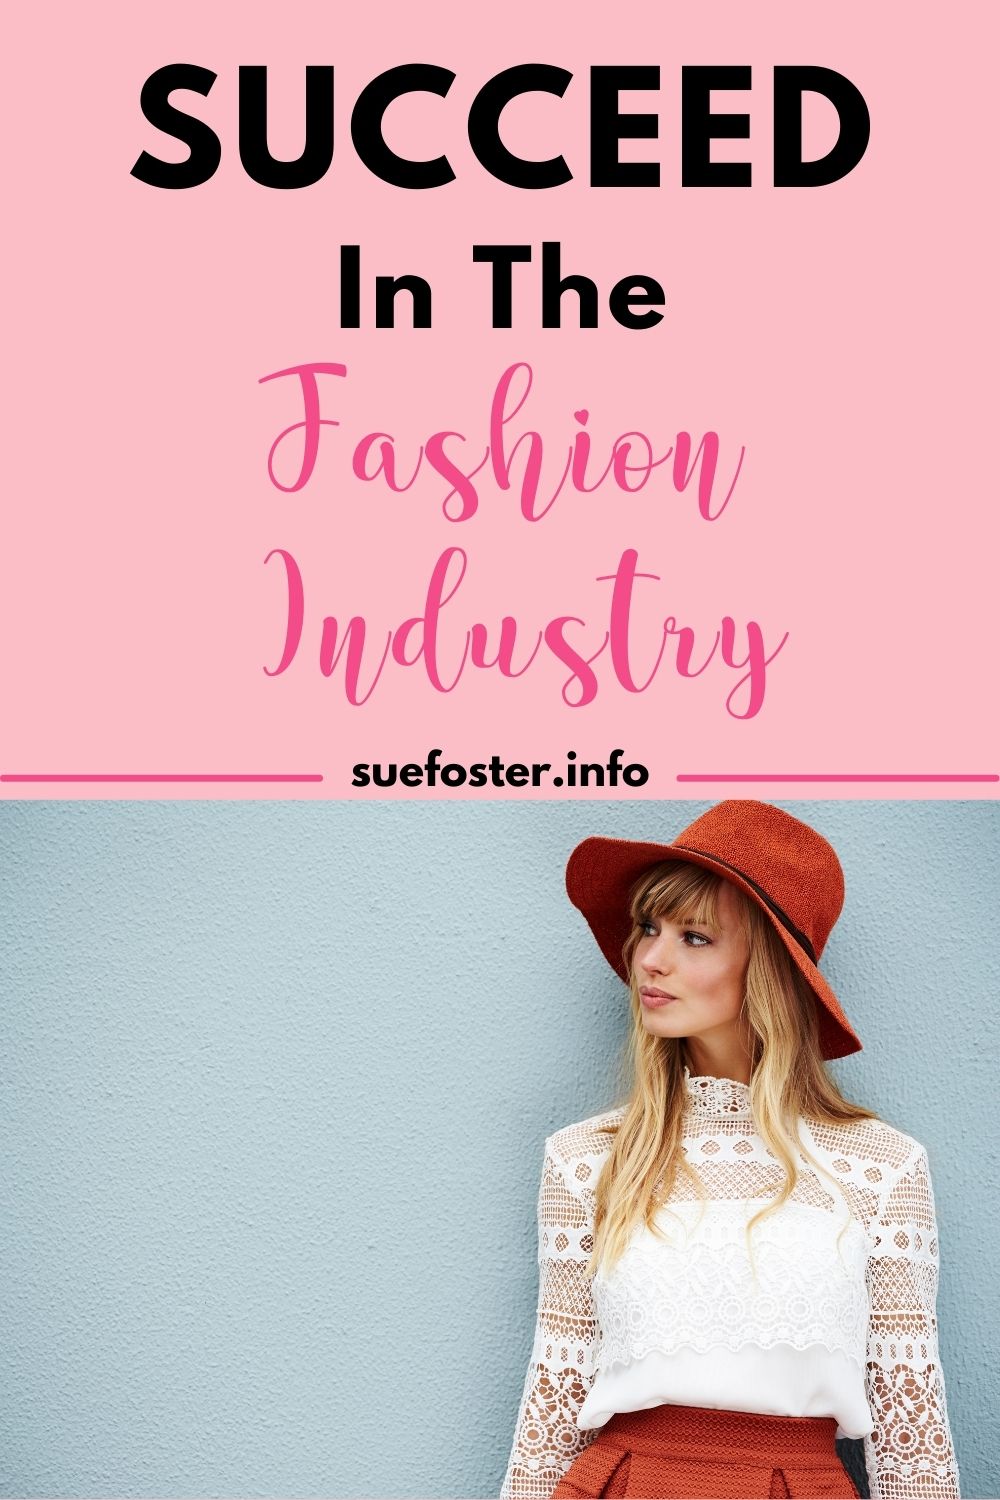 The fashion industry is making a huge change in the way it does things. It’s time that you know these trends and leverage them for the success of your company.